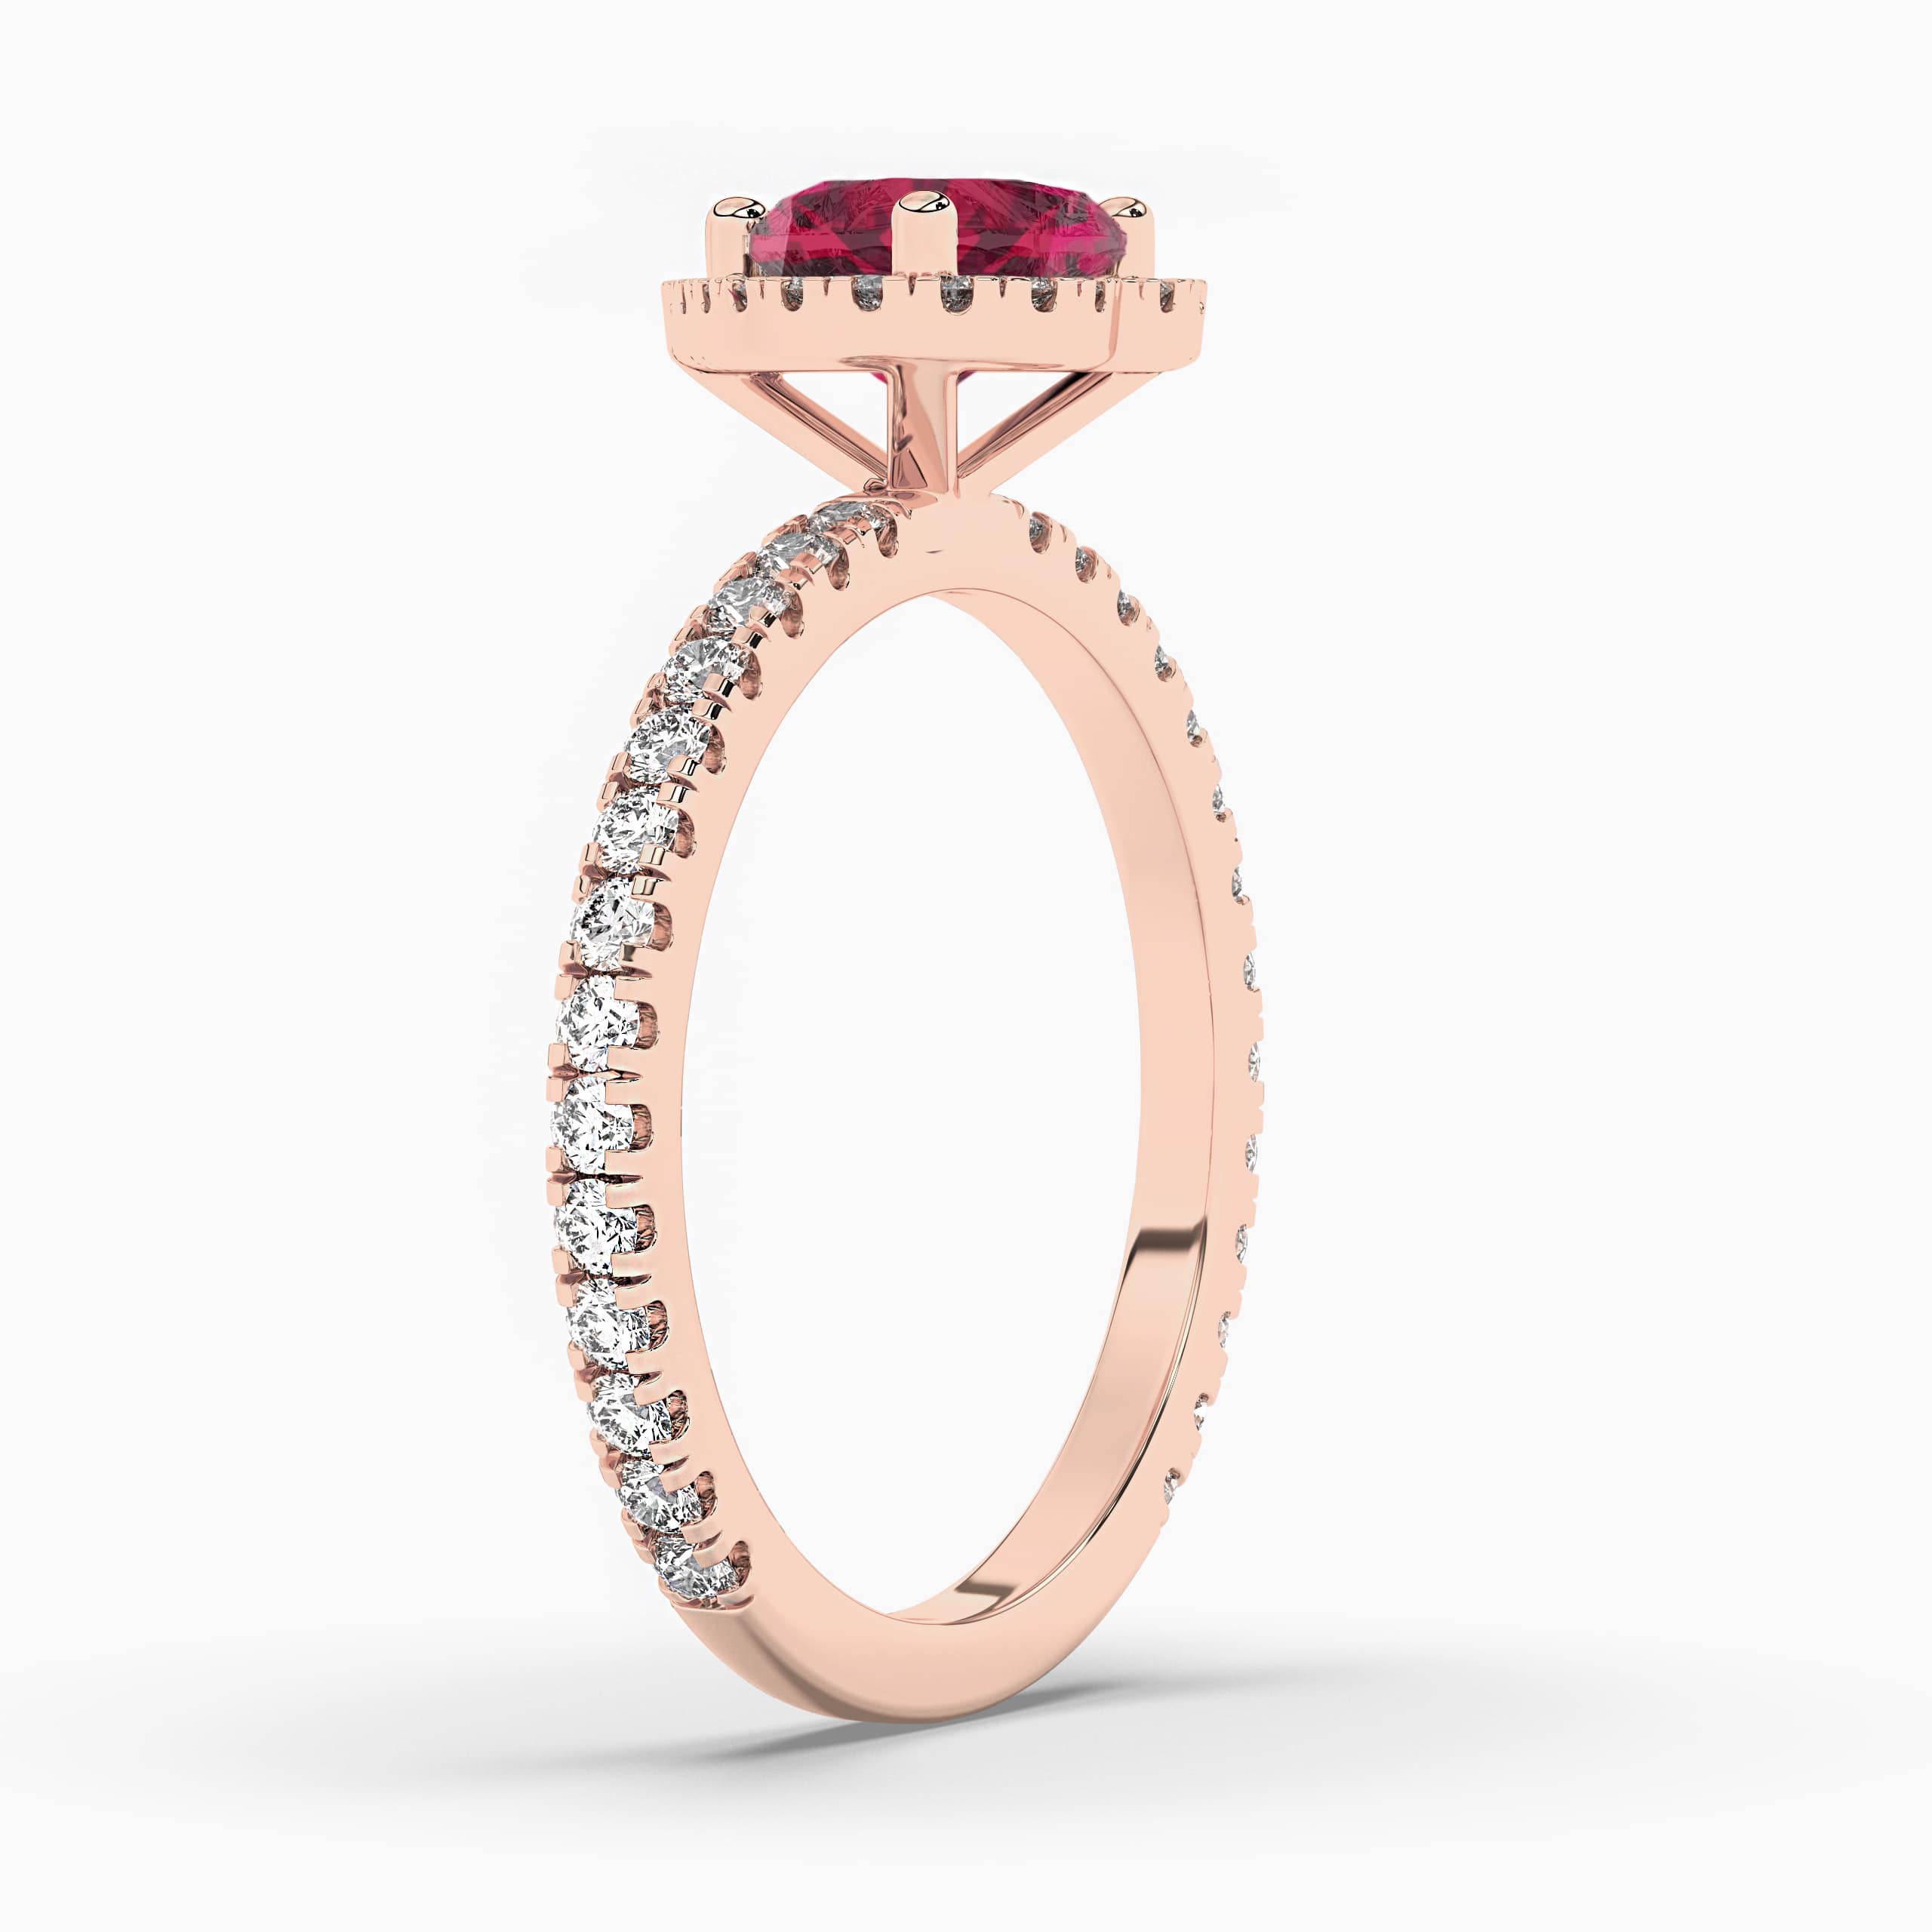 Oval Cut Ruby Engagement Ring Rose Gold Heart Shaped Ring